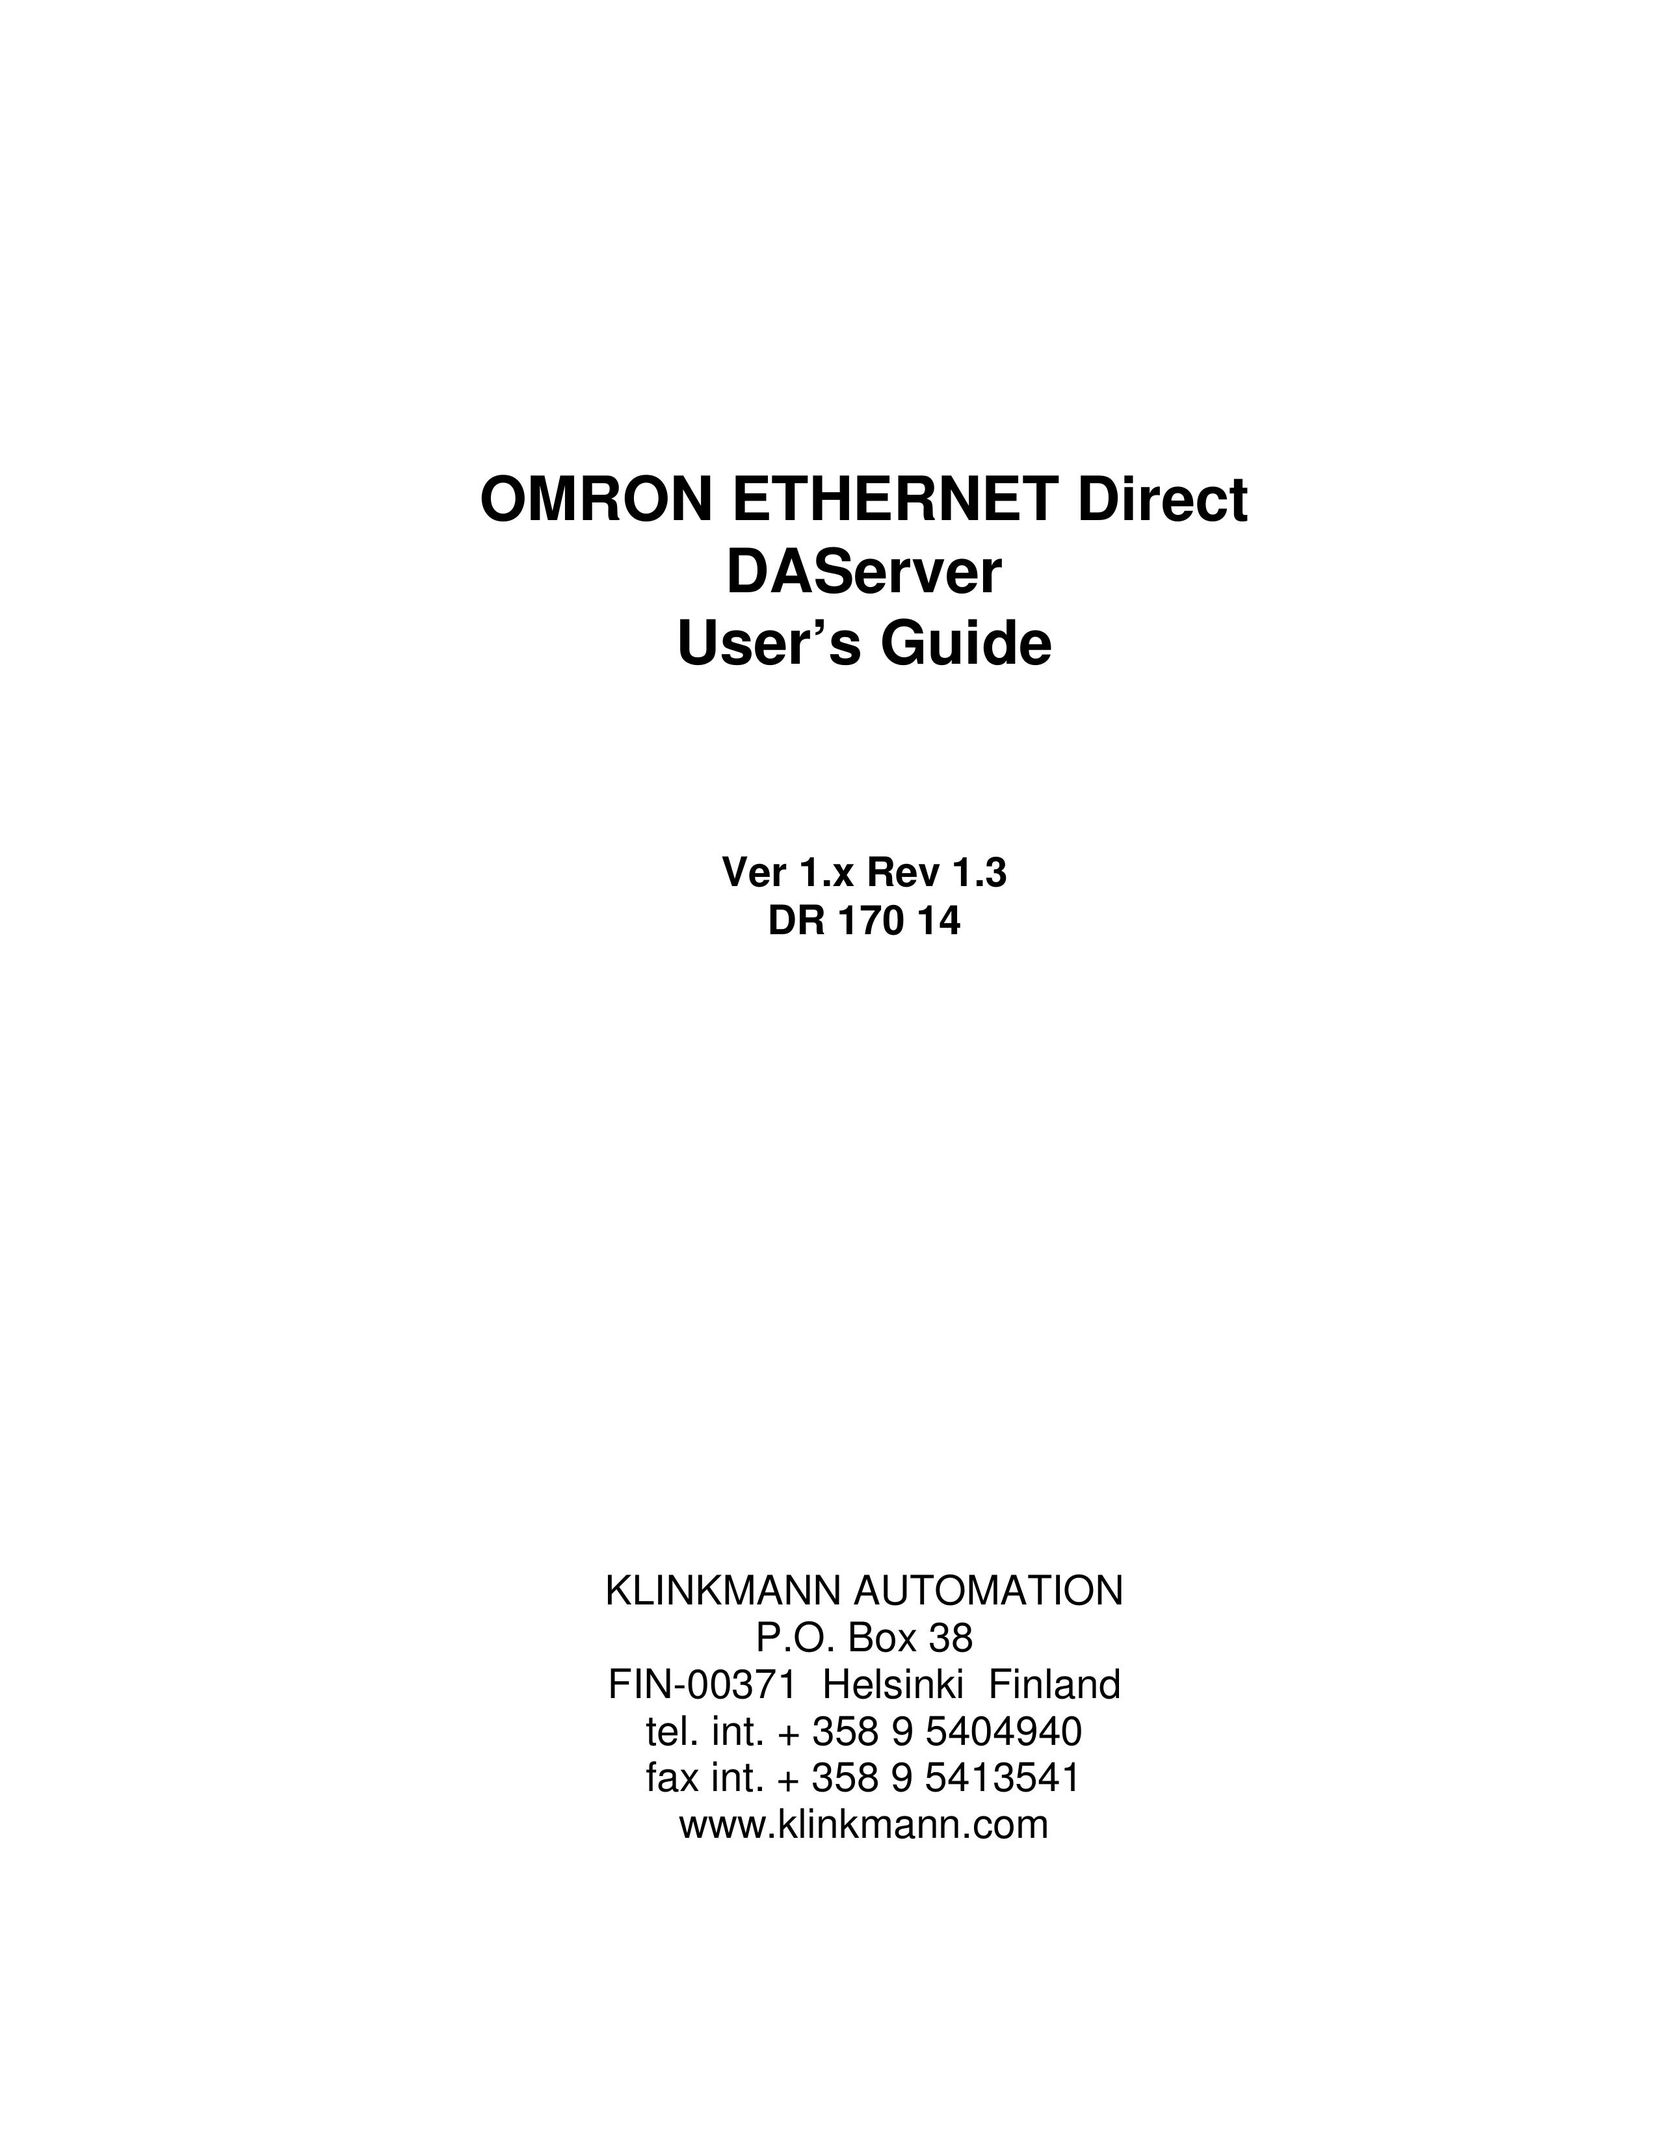 Omron DR 170 14 Network Card User Manual